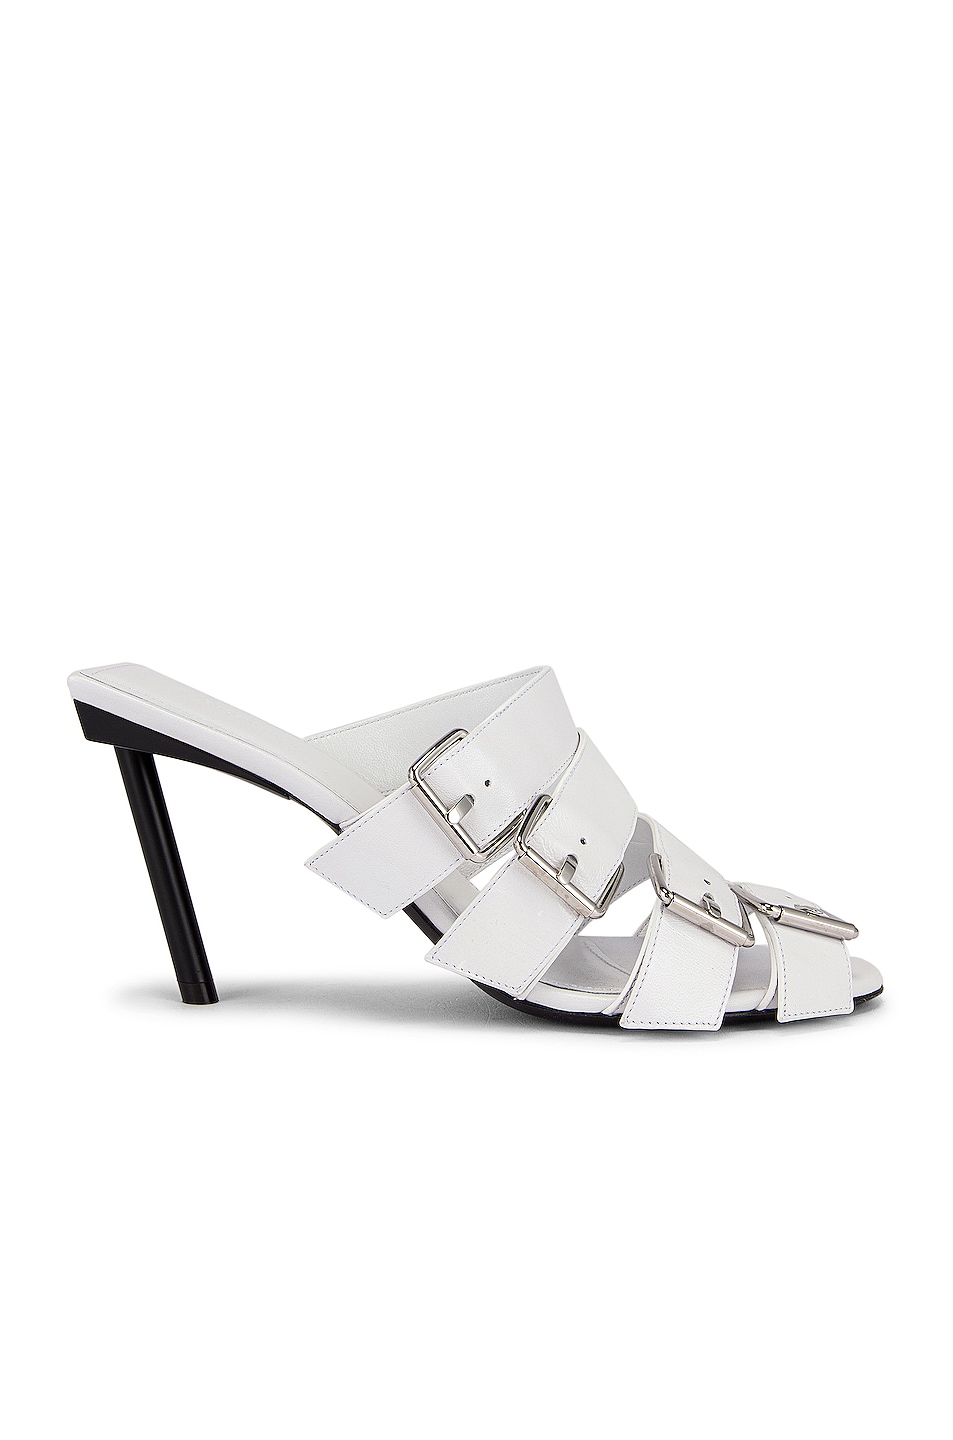 Image 1 of Balenciaga Buckle Knife Sandals in Optical White & Silver